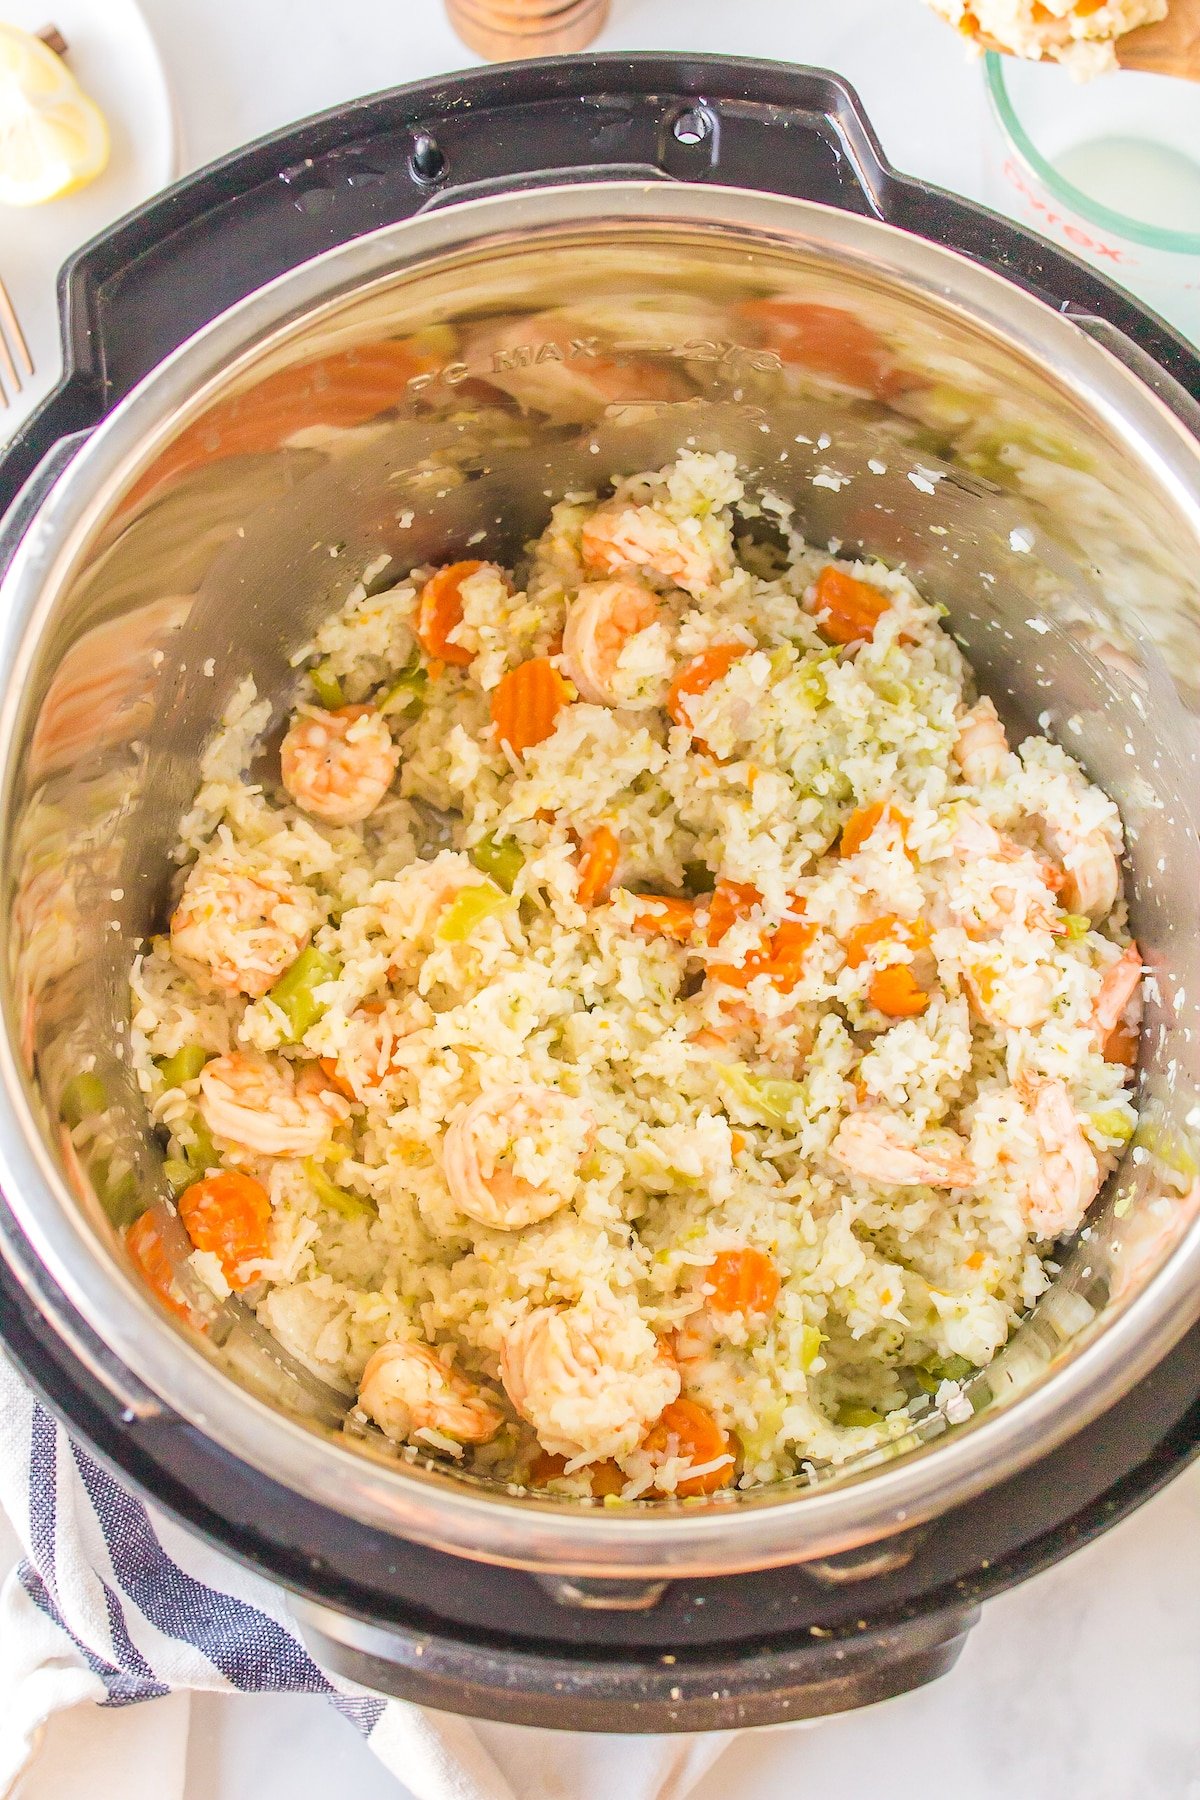 Shrimp and rice with veggies in an Instant Pot.